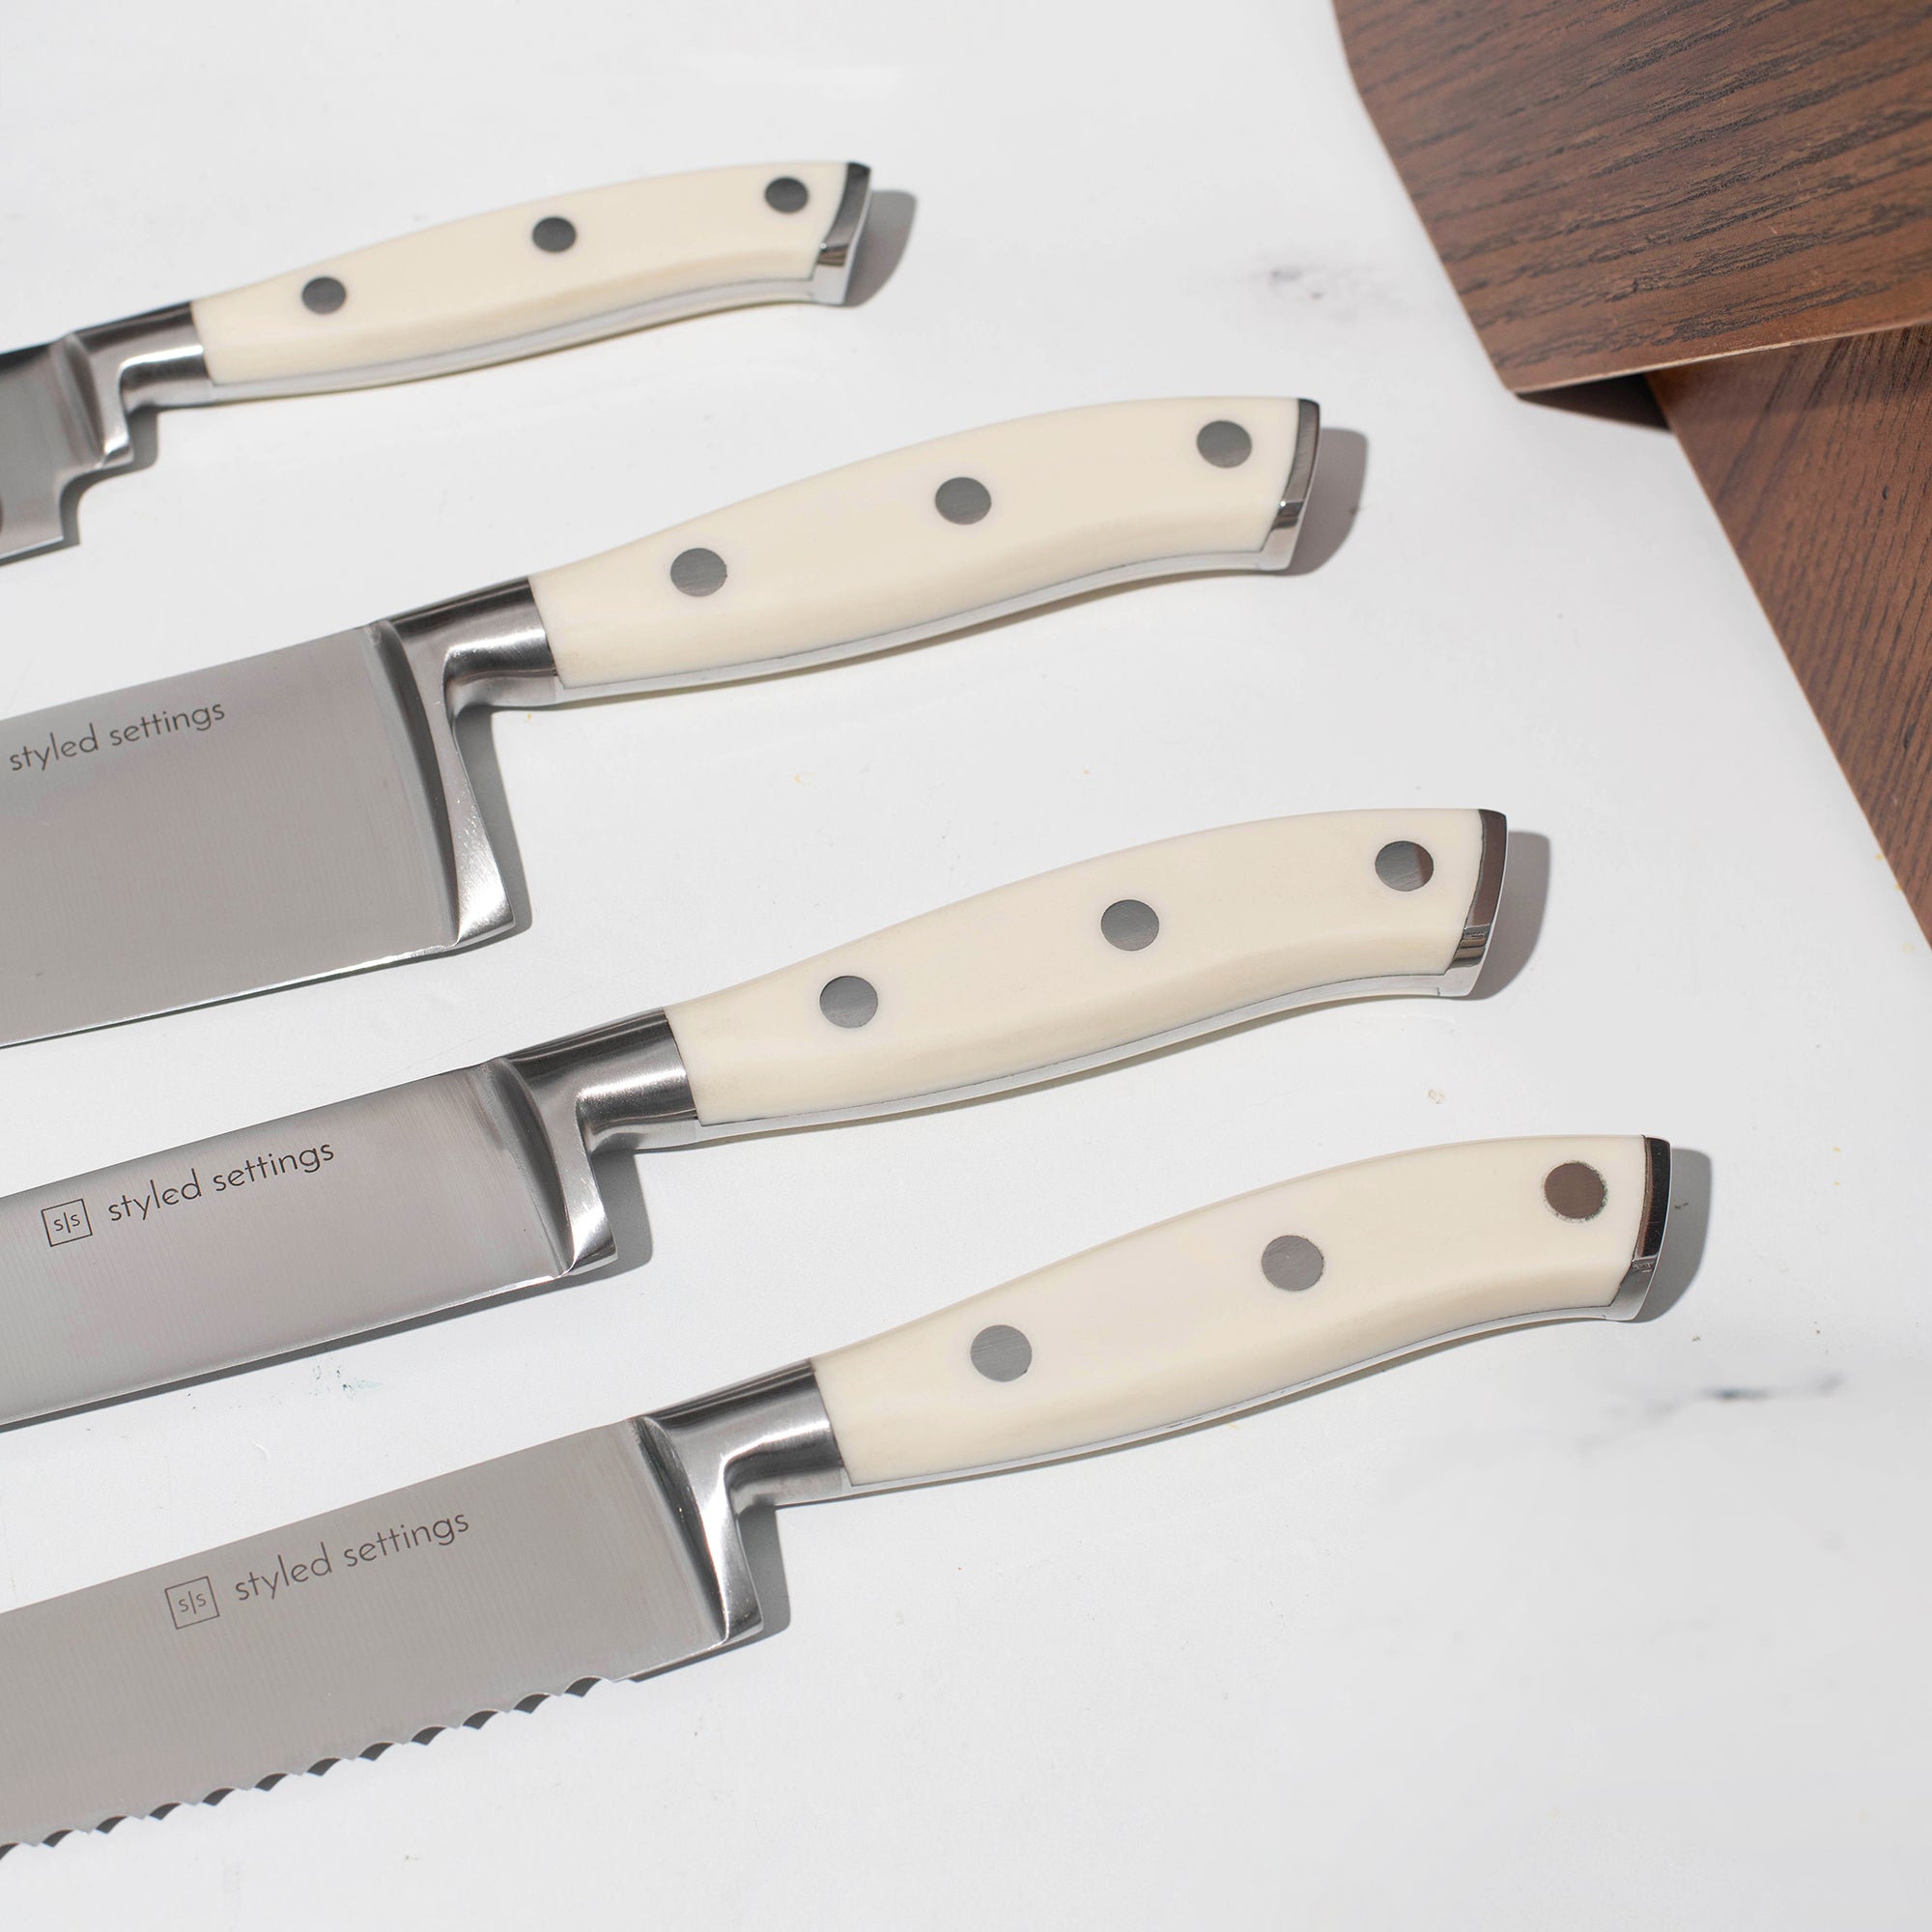 White and Silver Knife Set with Self-Sharpening Block